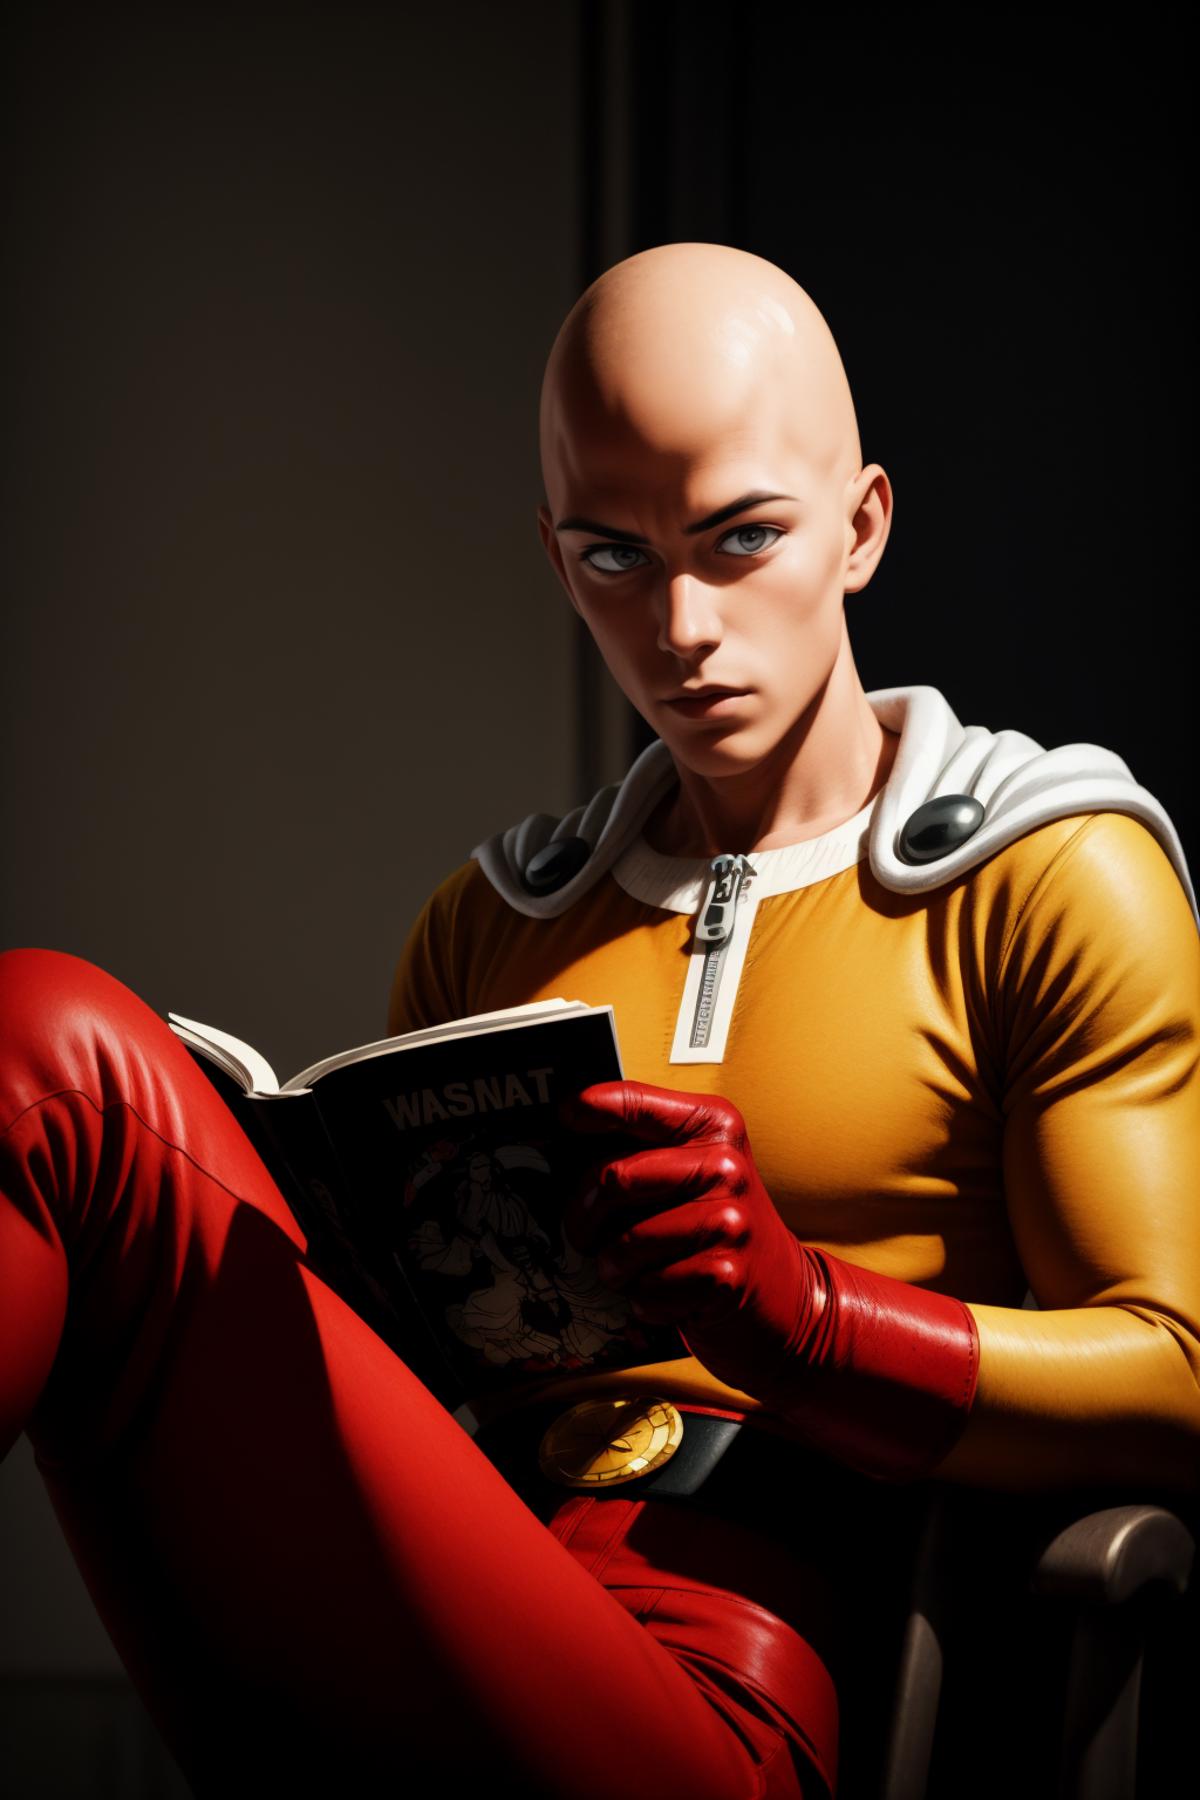 Anime Character Reading Book with Red Gloves and Yellow Costume.